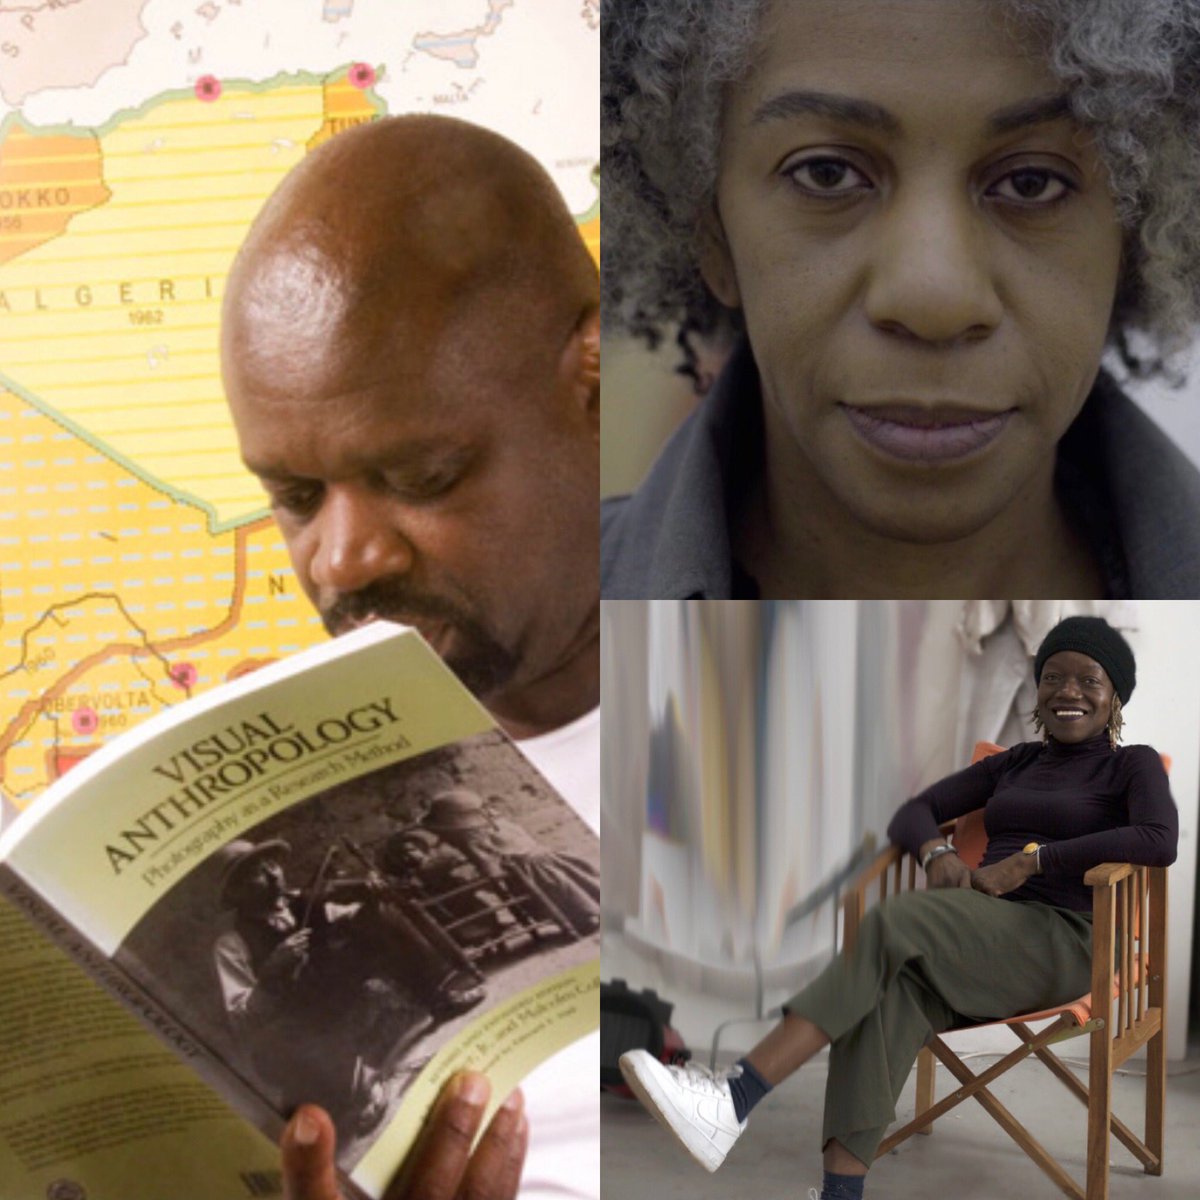 ‼️Today‼️at 6.30pm BST the opening keynote #forarthistory2021 Annual Conference will be presented by artists #ClaudetteJohnson #keithpiper and #marlenesmith 
Find out more eu-admin.eventscloud.com/website/2065/k…